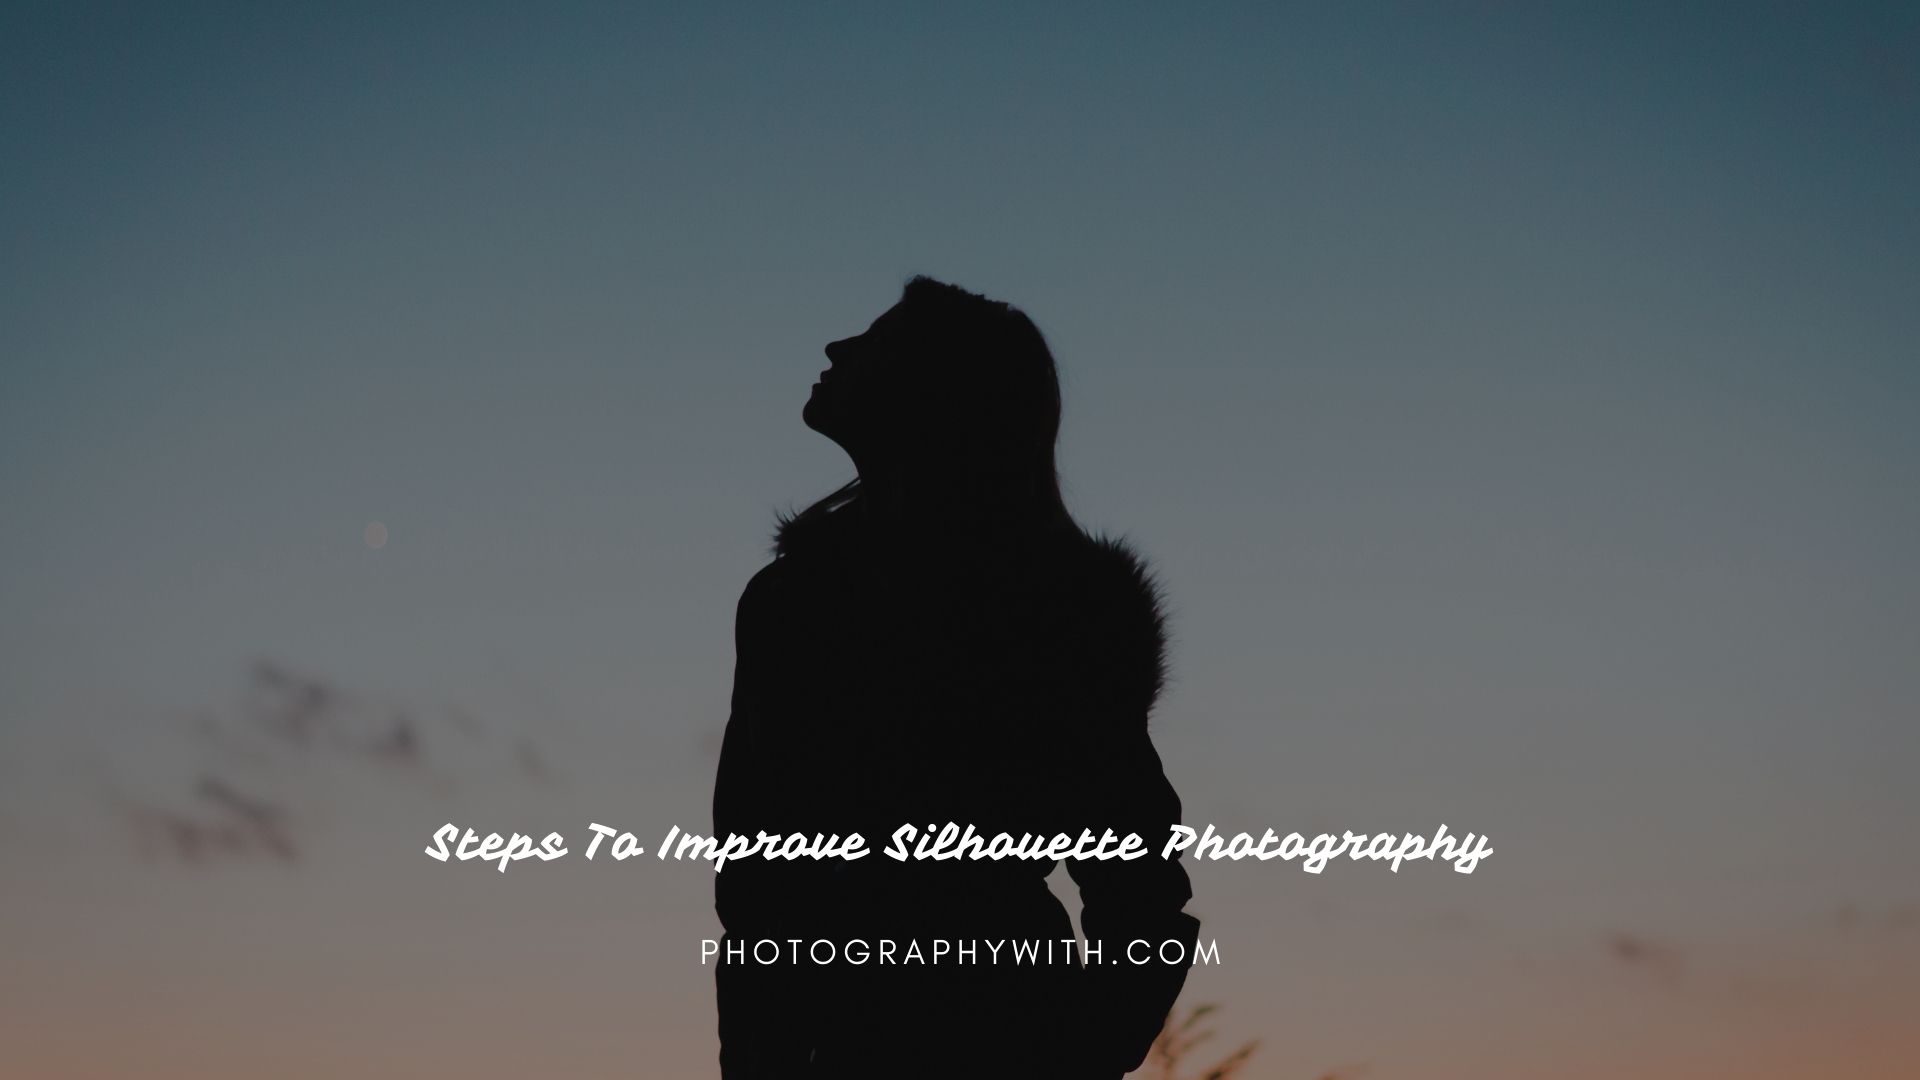 Steps To Improve Silhouette Photography